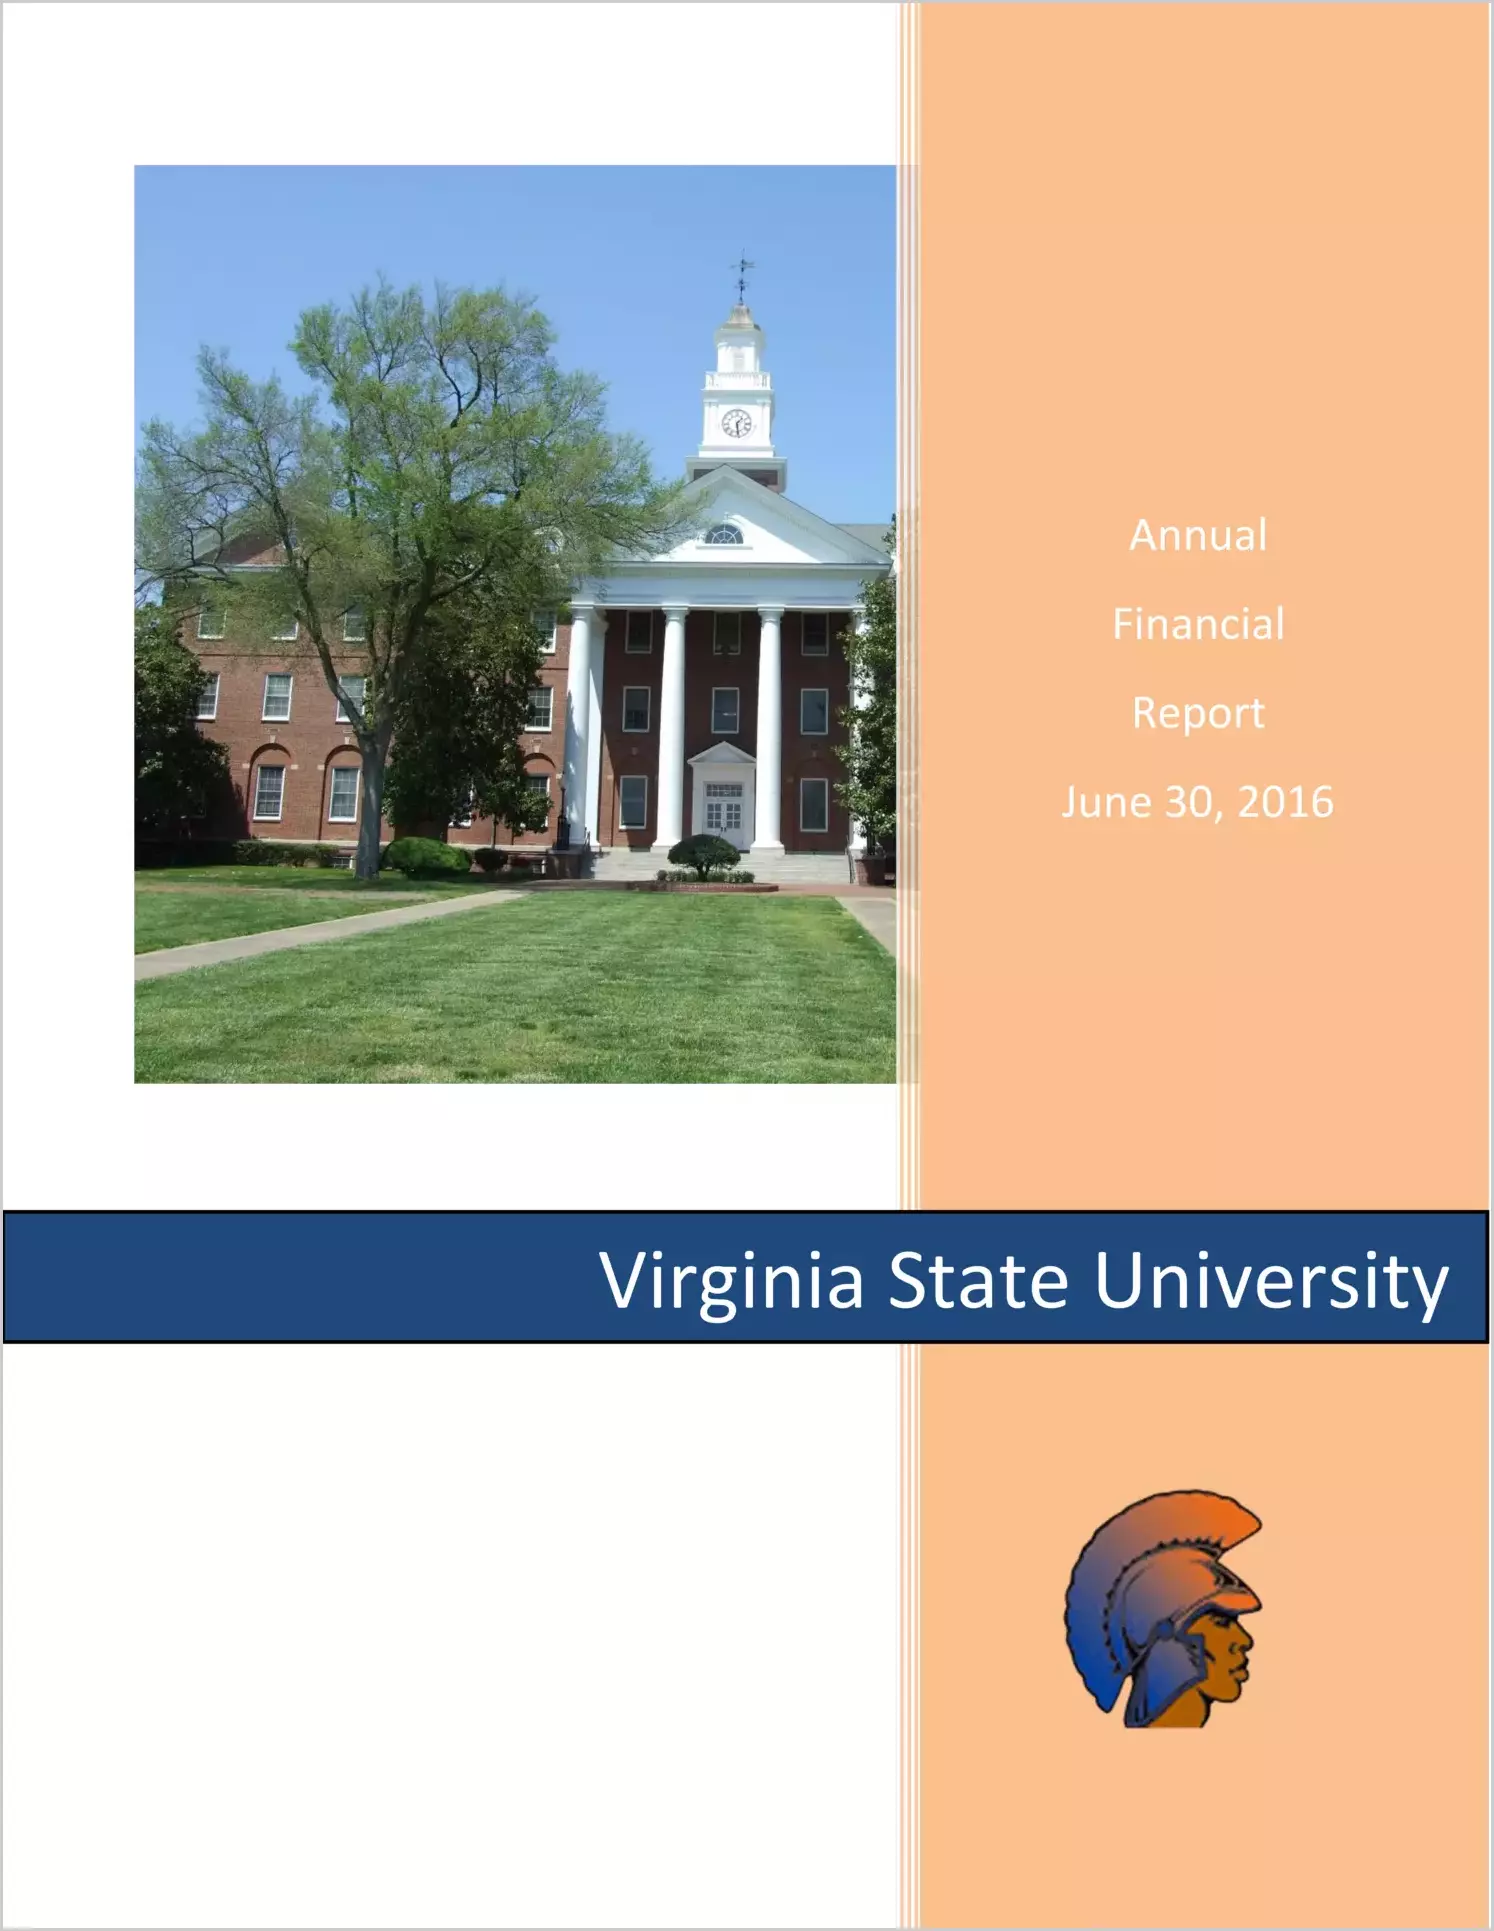 Virginia State University Financial Statement for the year ended June 30, 2016